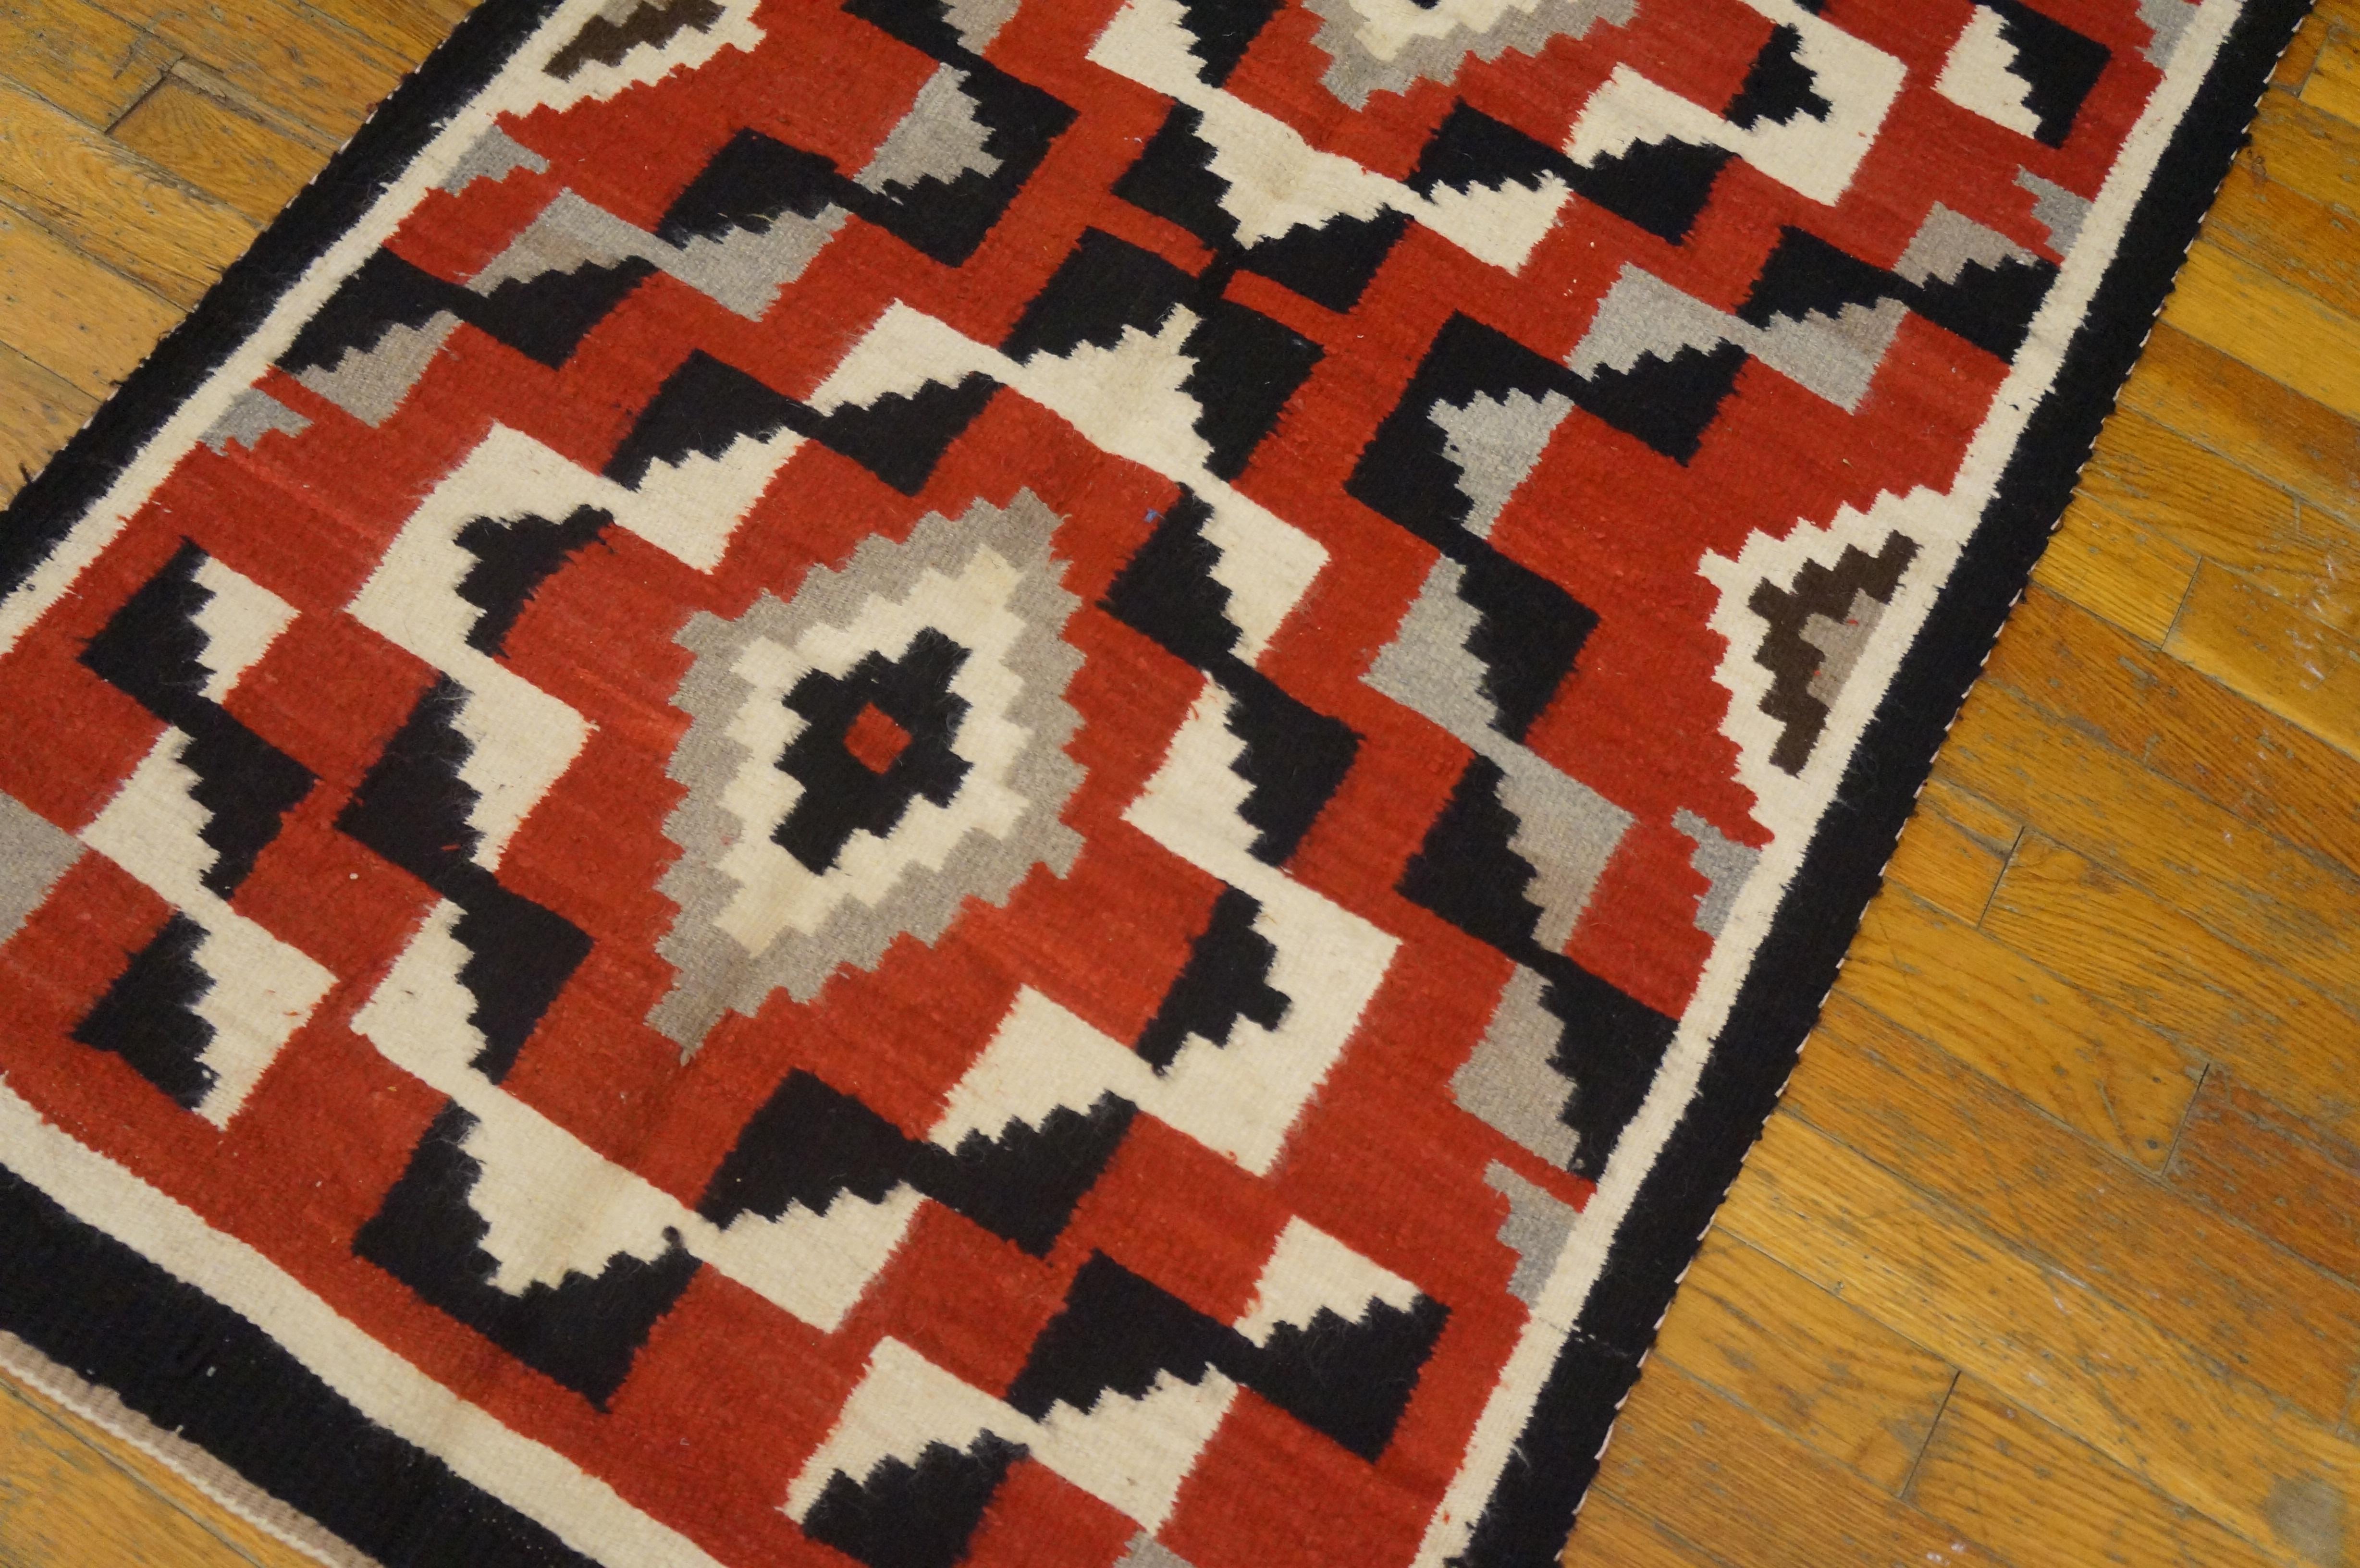 Antique Navajo rug with geometric design and size: 2'8